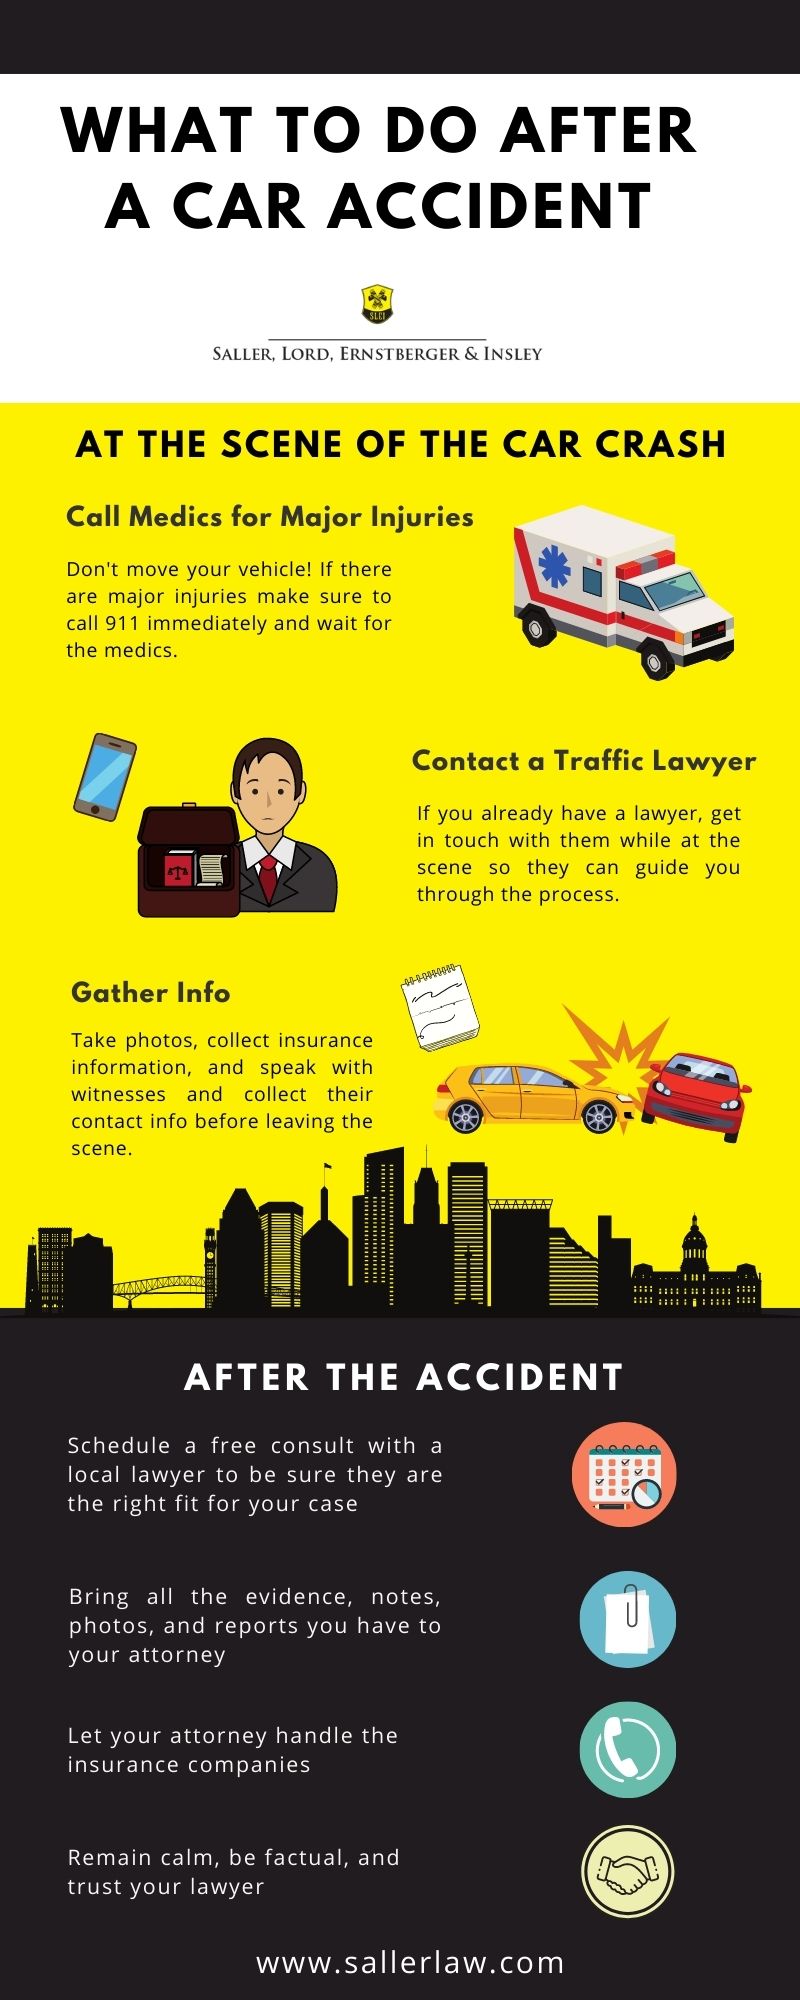 Things to Bring During Your First Meeting with a Car Accident Lawyer